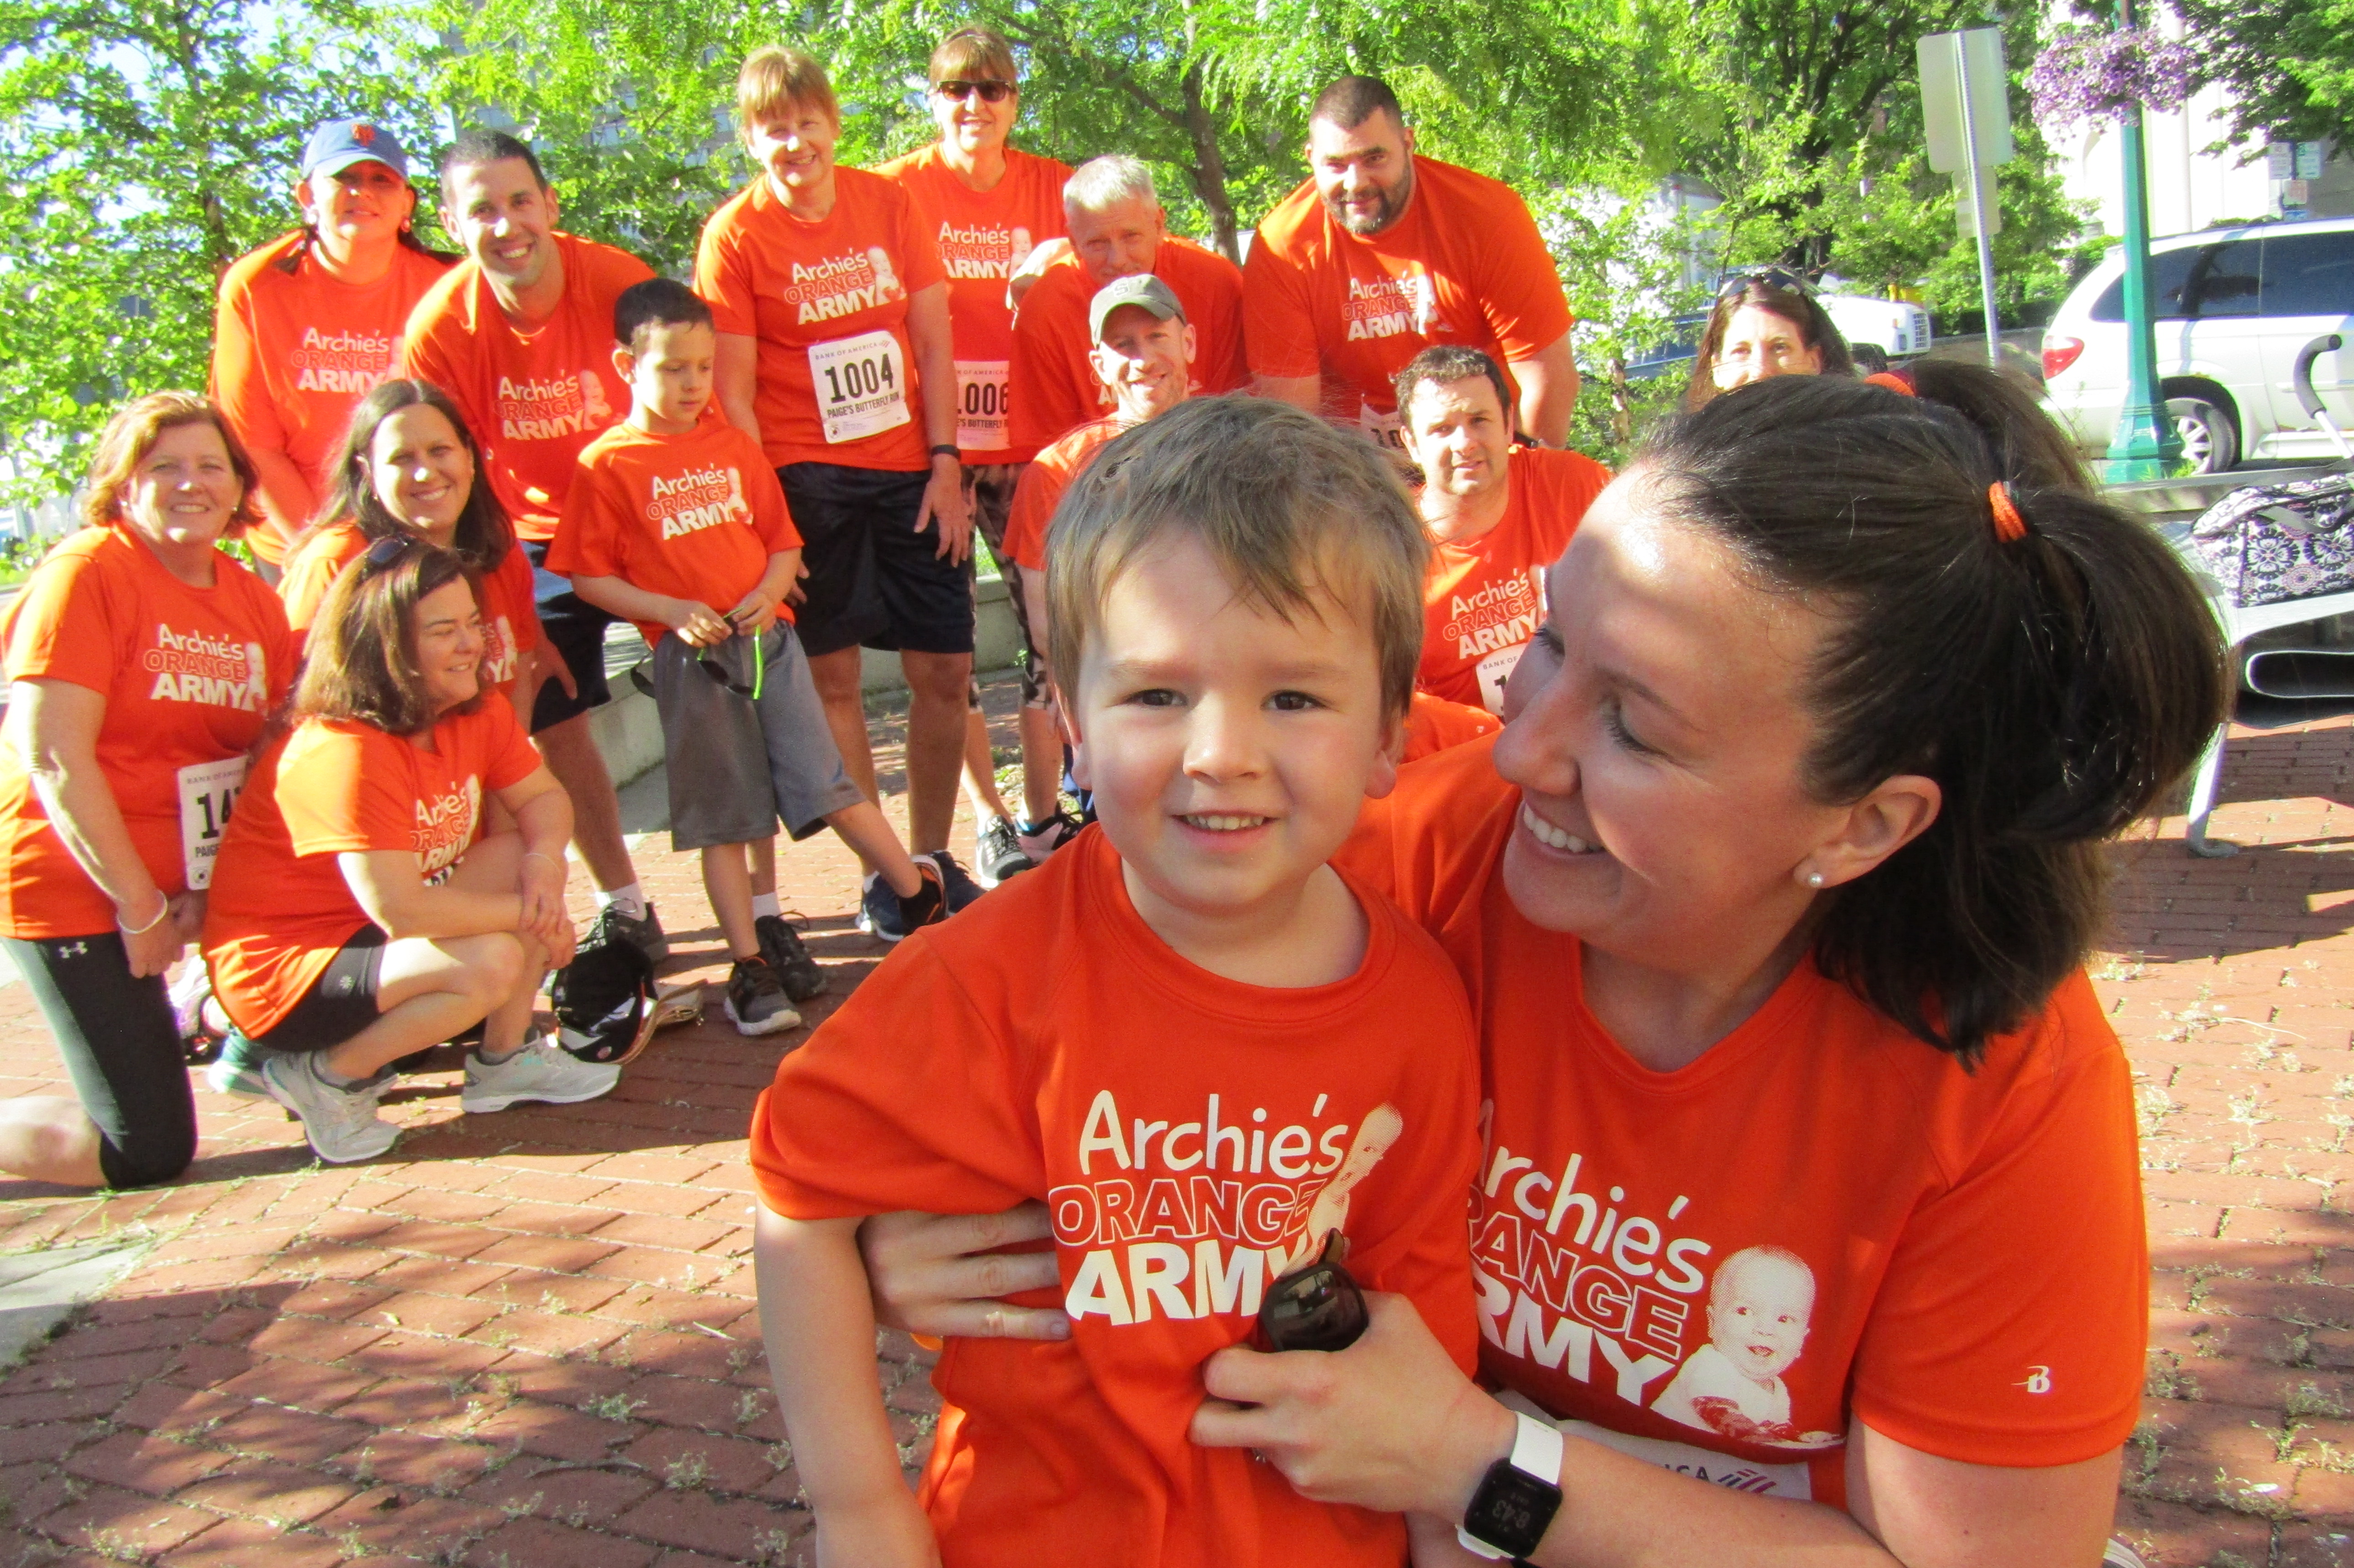 One of the organizations that helped Archie Kulkus  and his family during his cancer treatment was Paige’s Butterfly Run, which has raised more than $3 million to help kids and their families in Central New York.